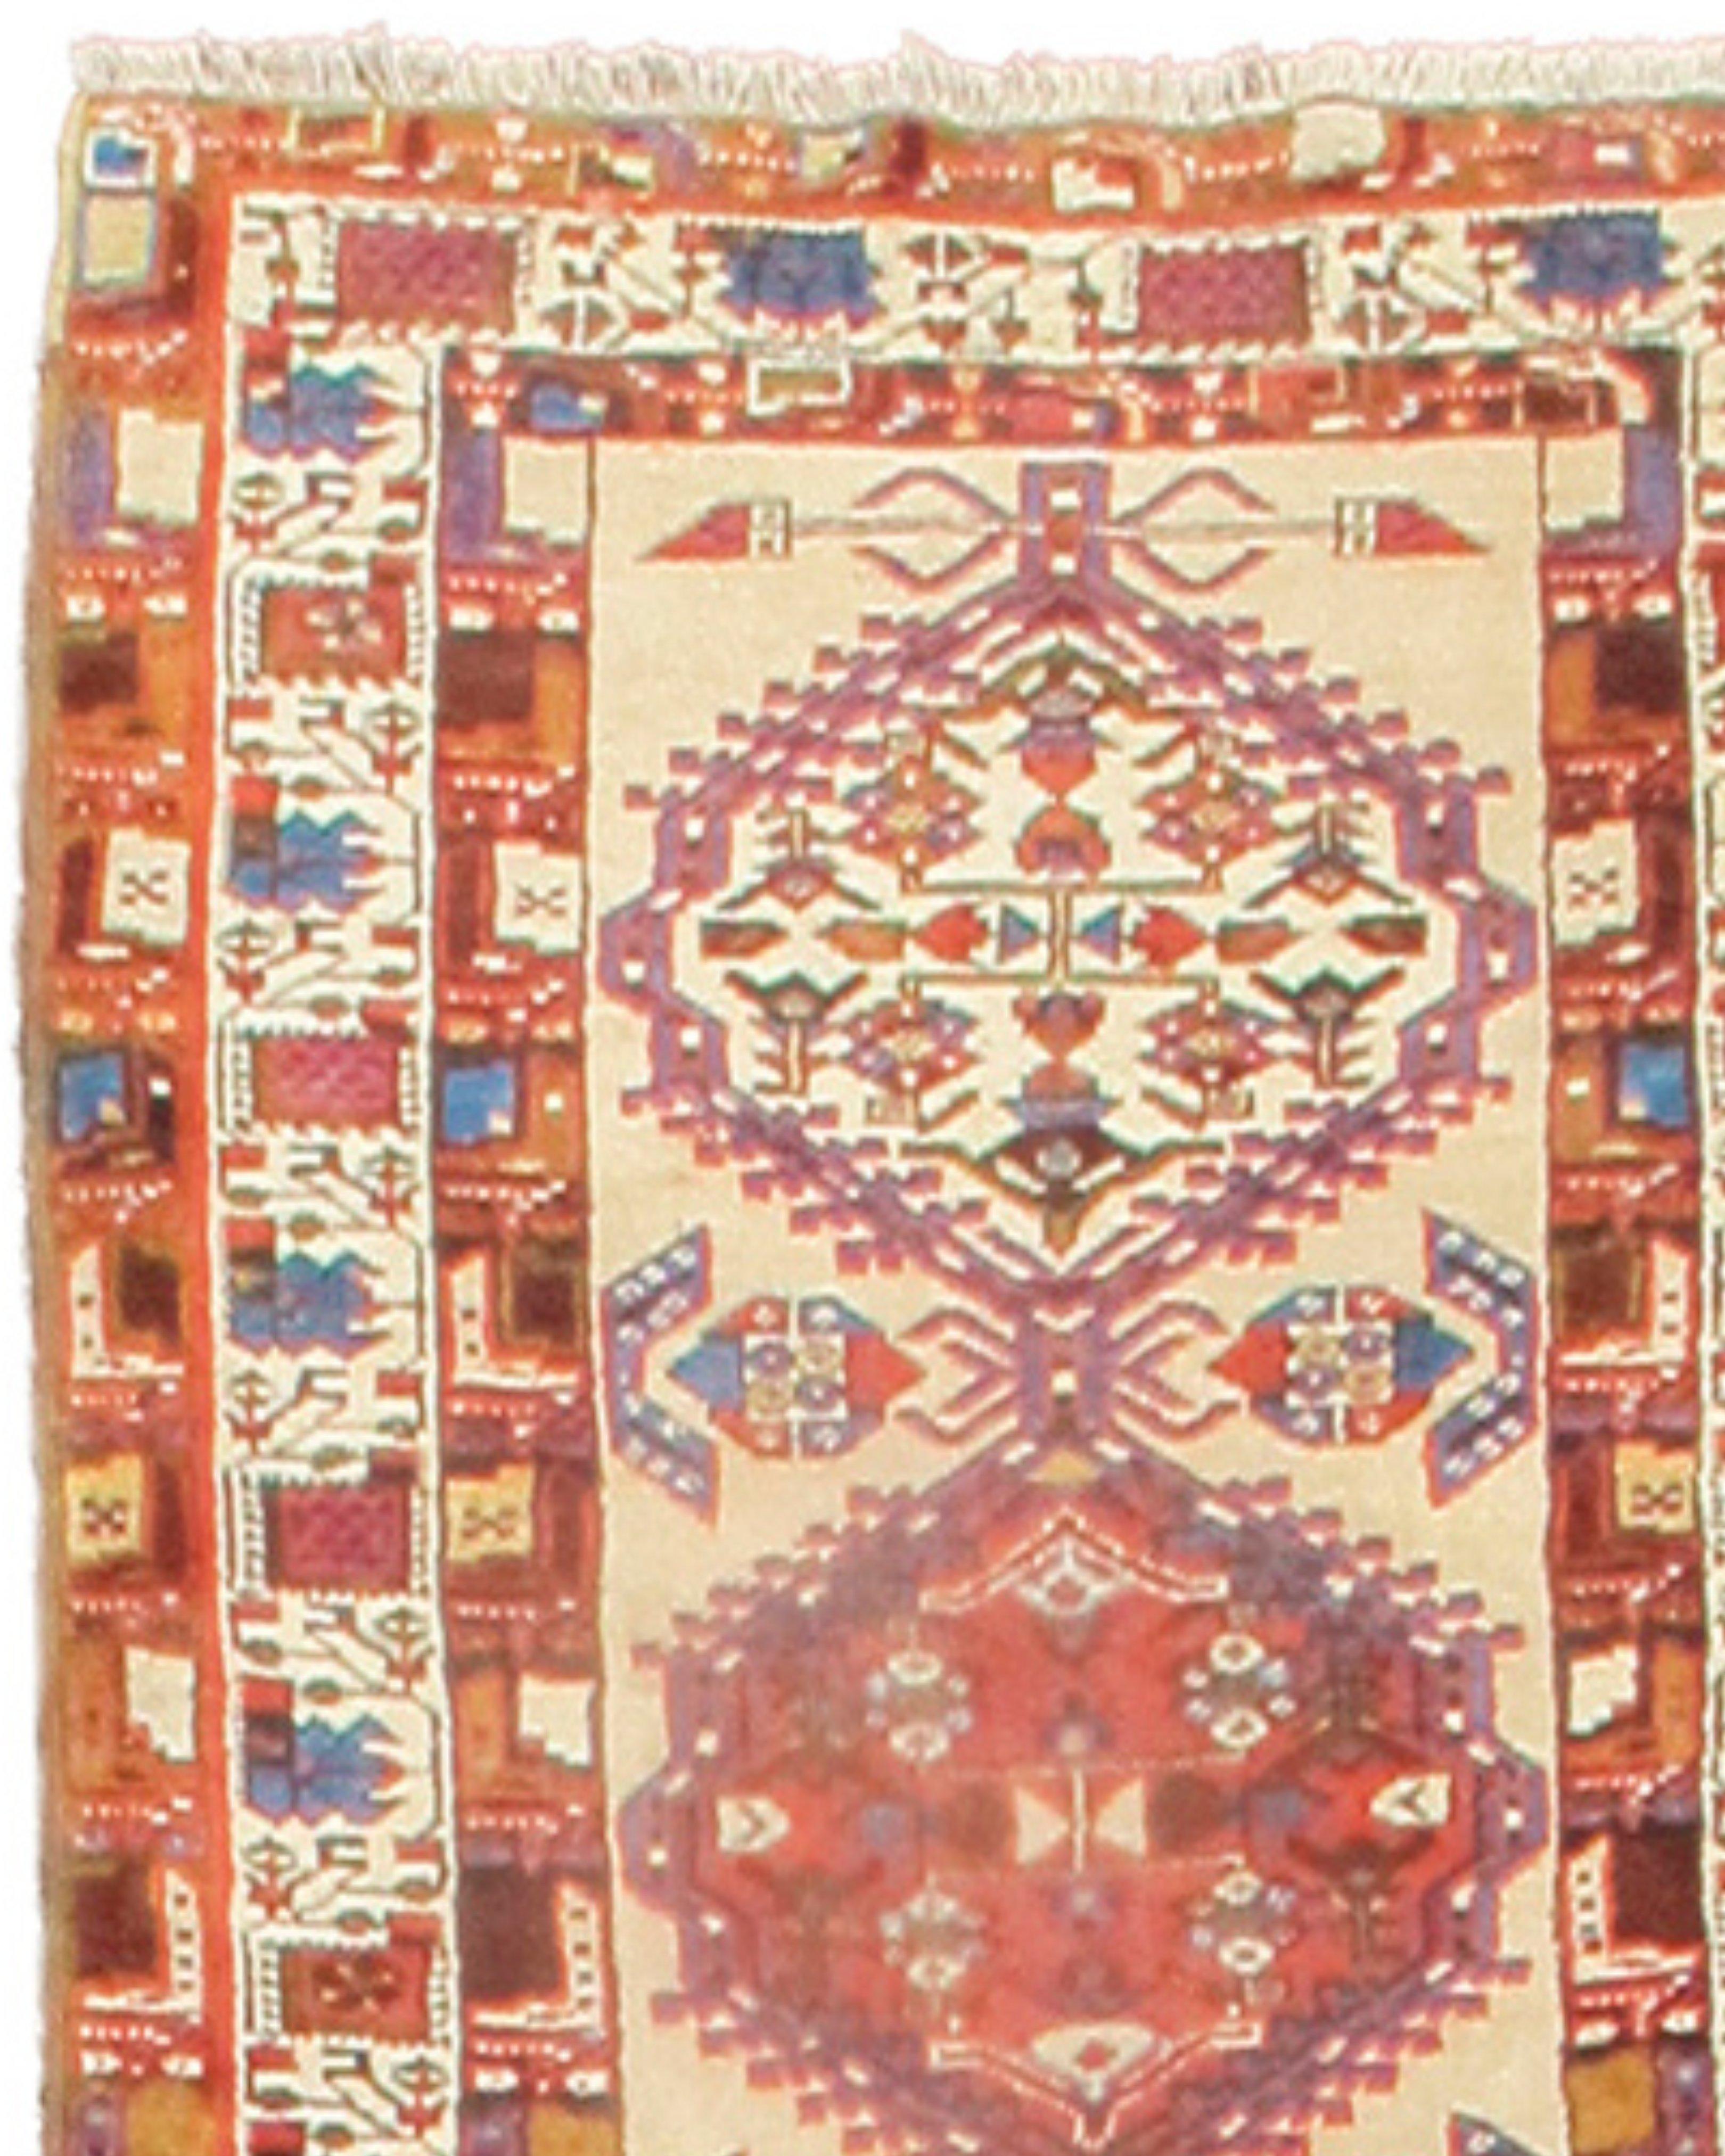 Hand-Knotted Antique Persian Serab Runner, 19th Century For Sale